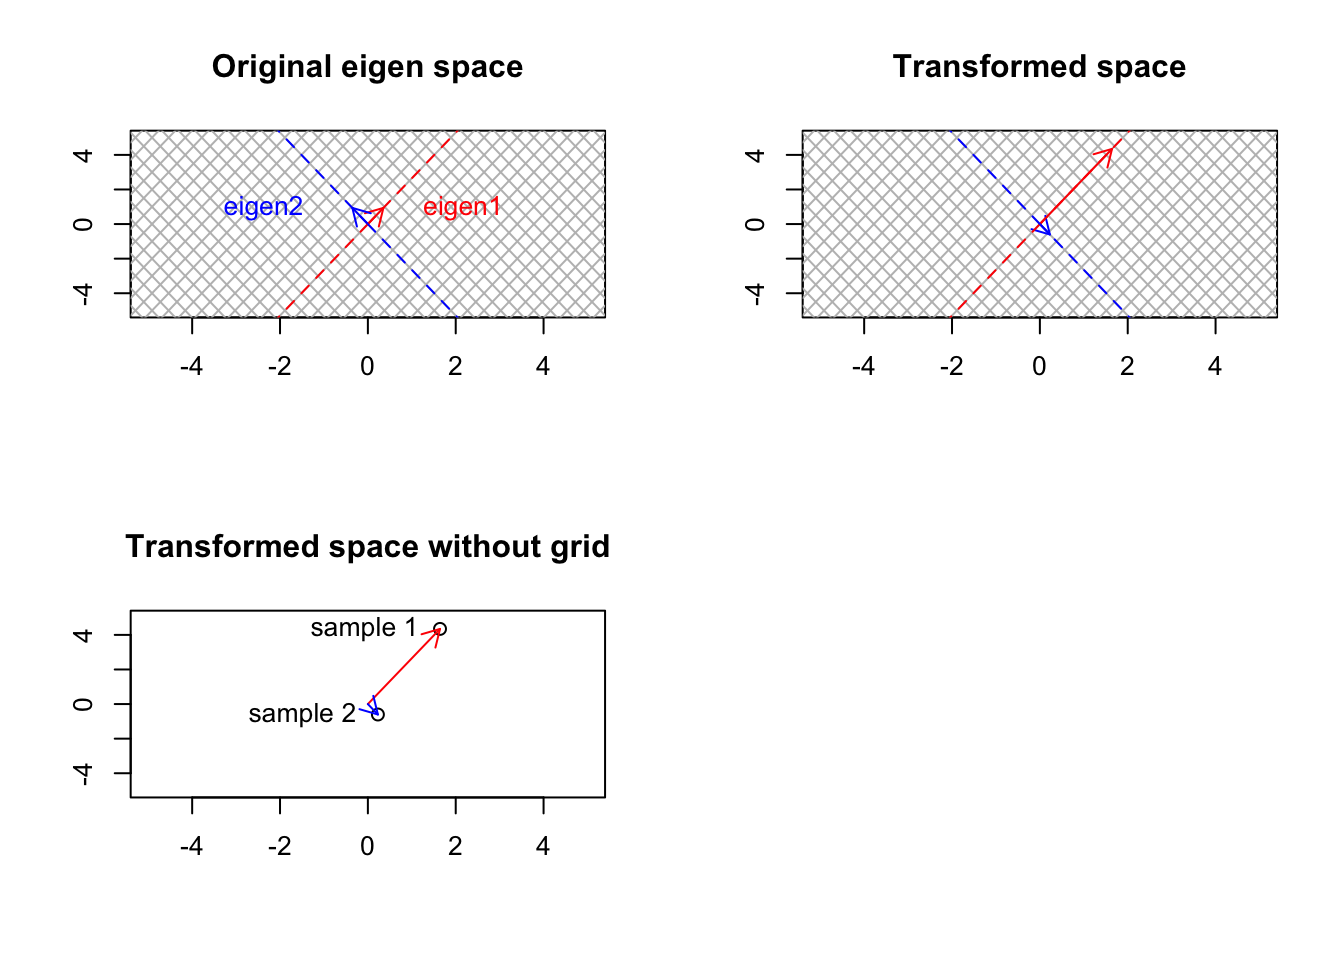 Smal gene expression matrix has been used to transform the eigenvector space